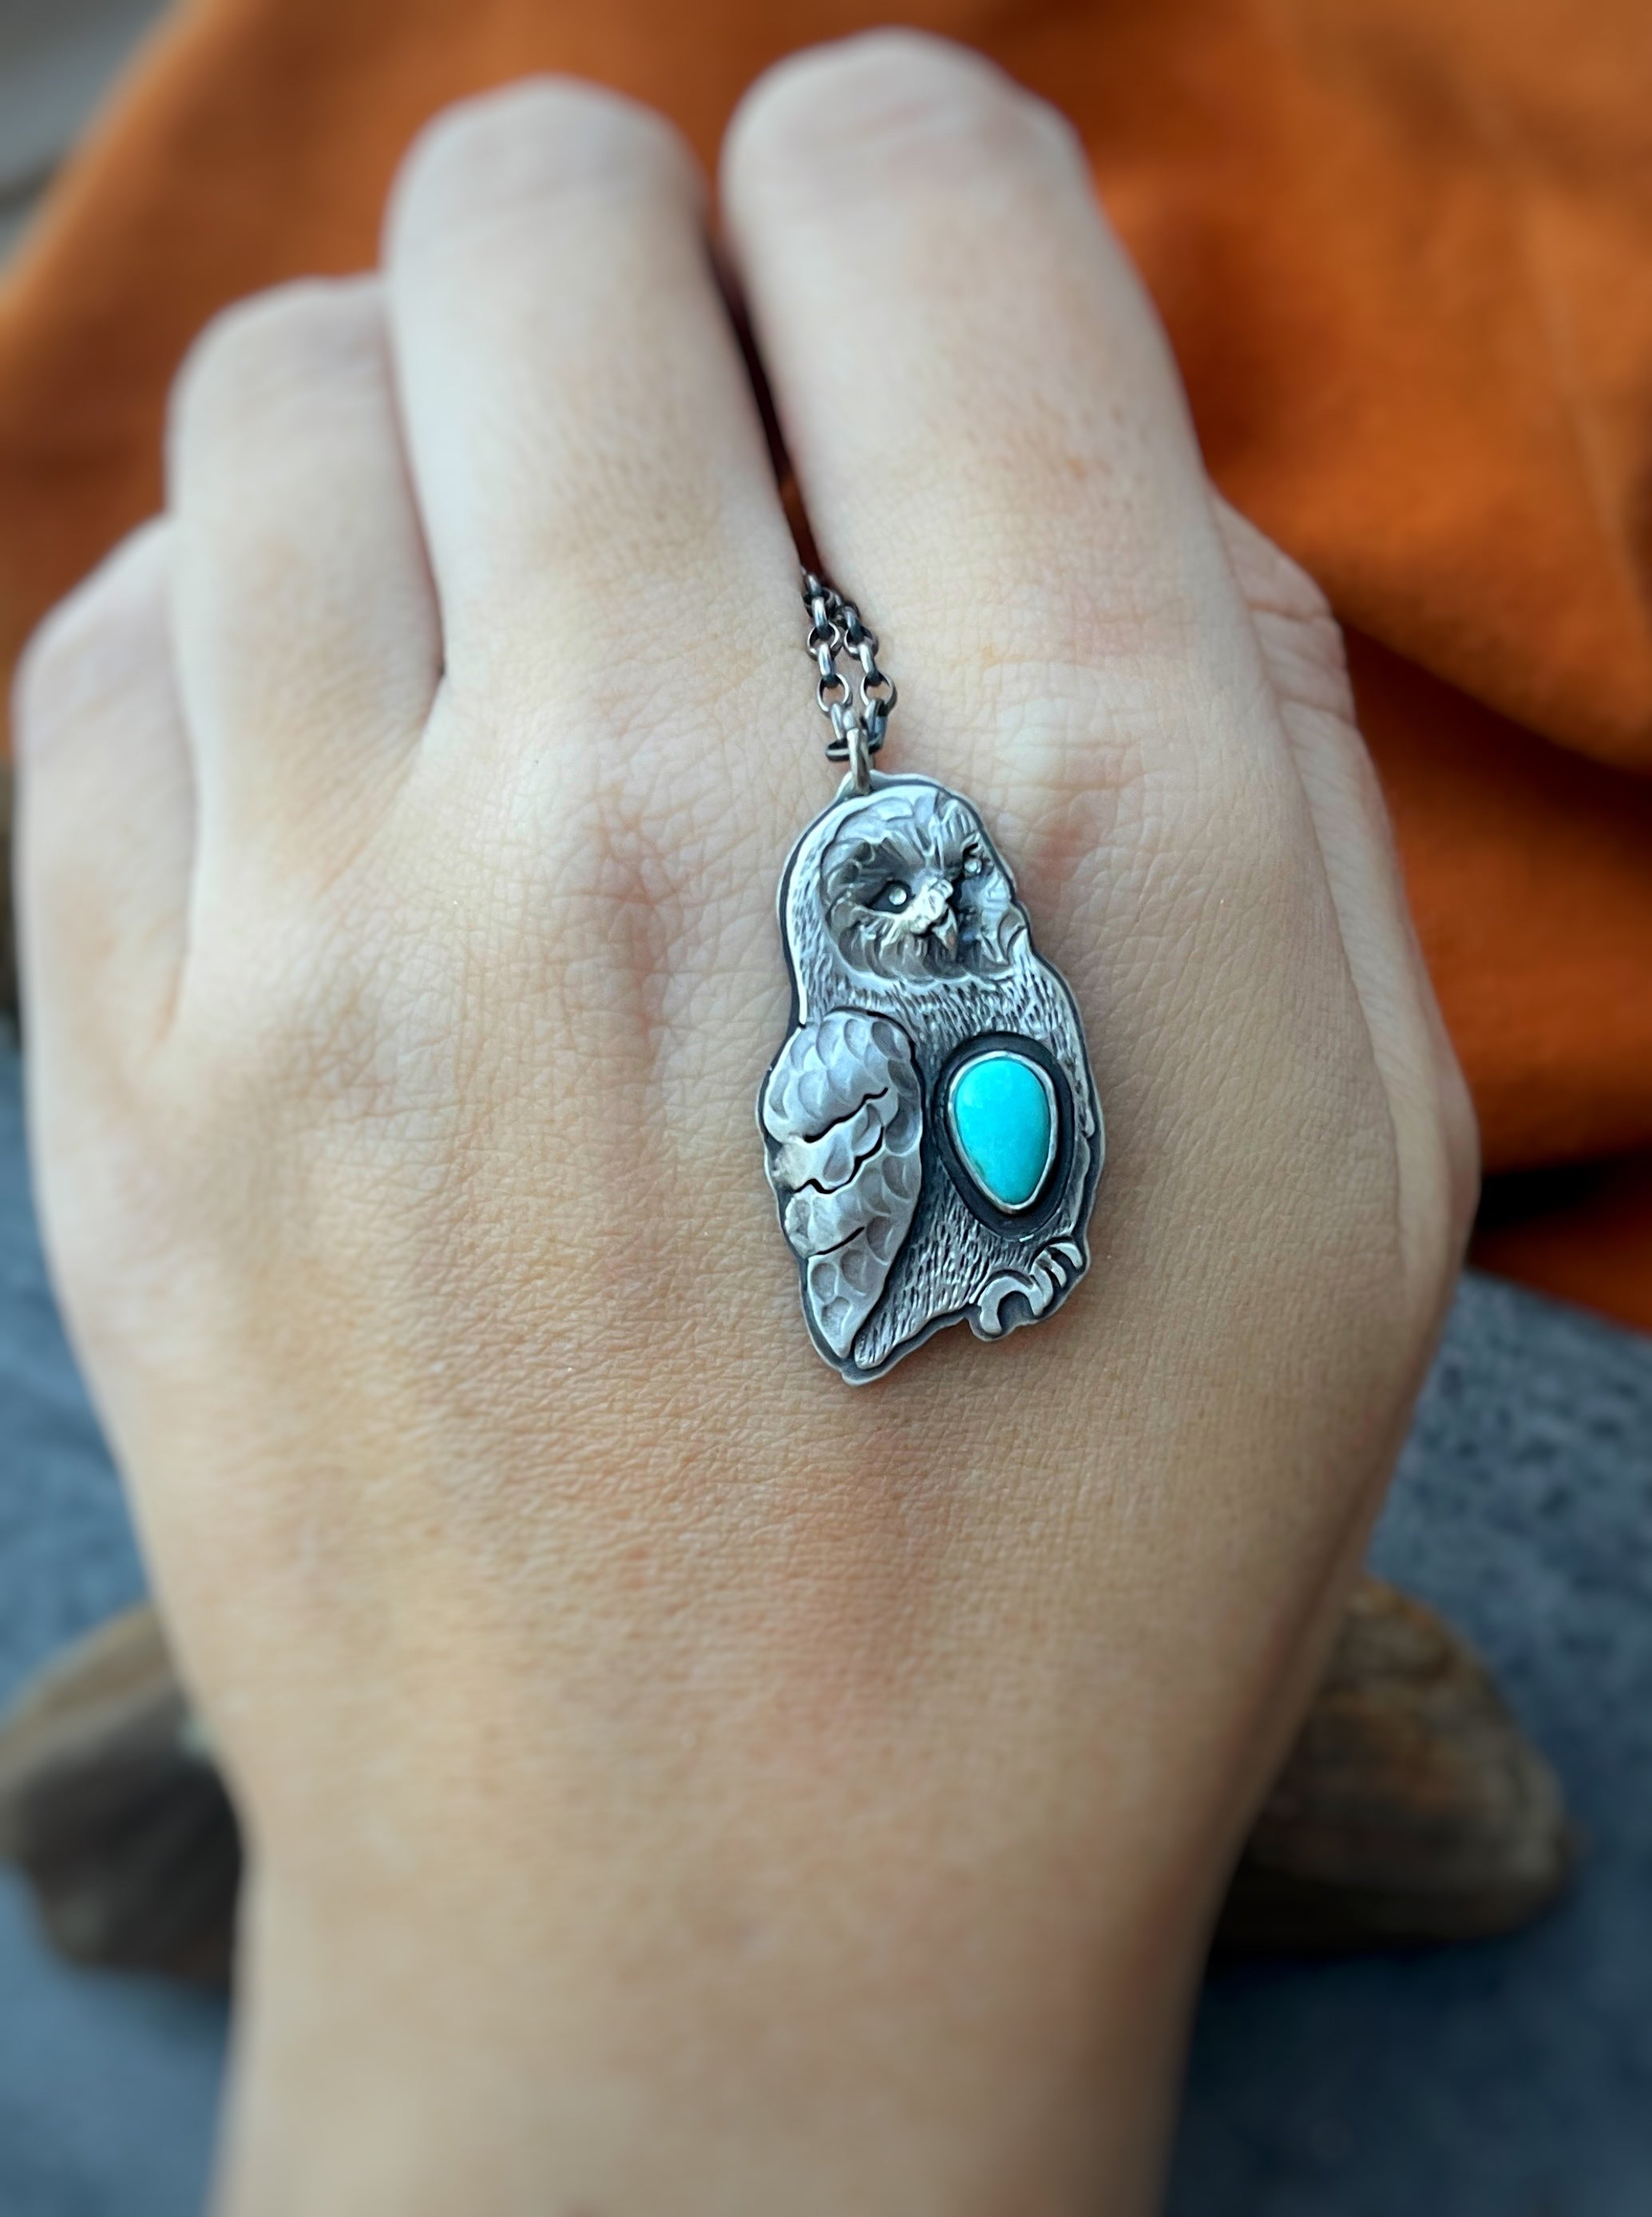 The Turquoise Owl Necklace